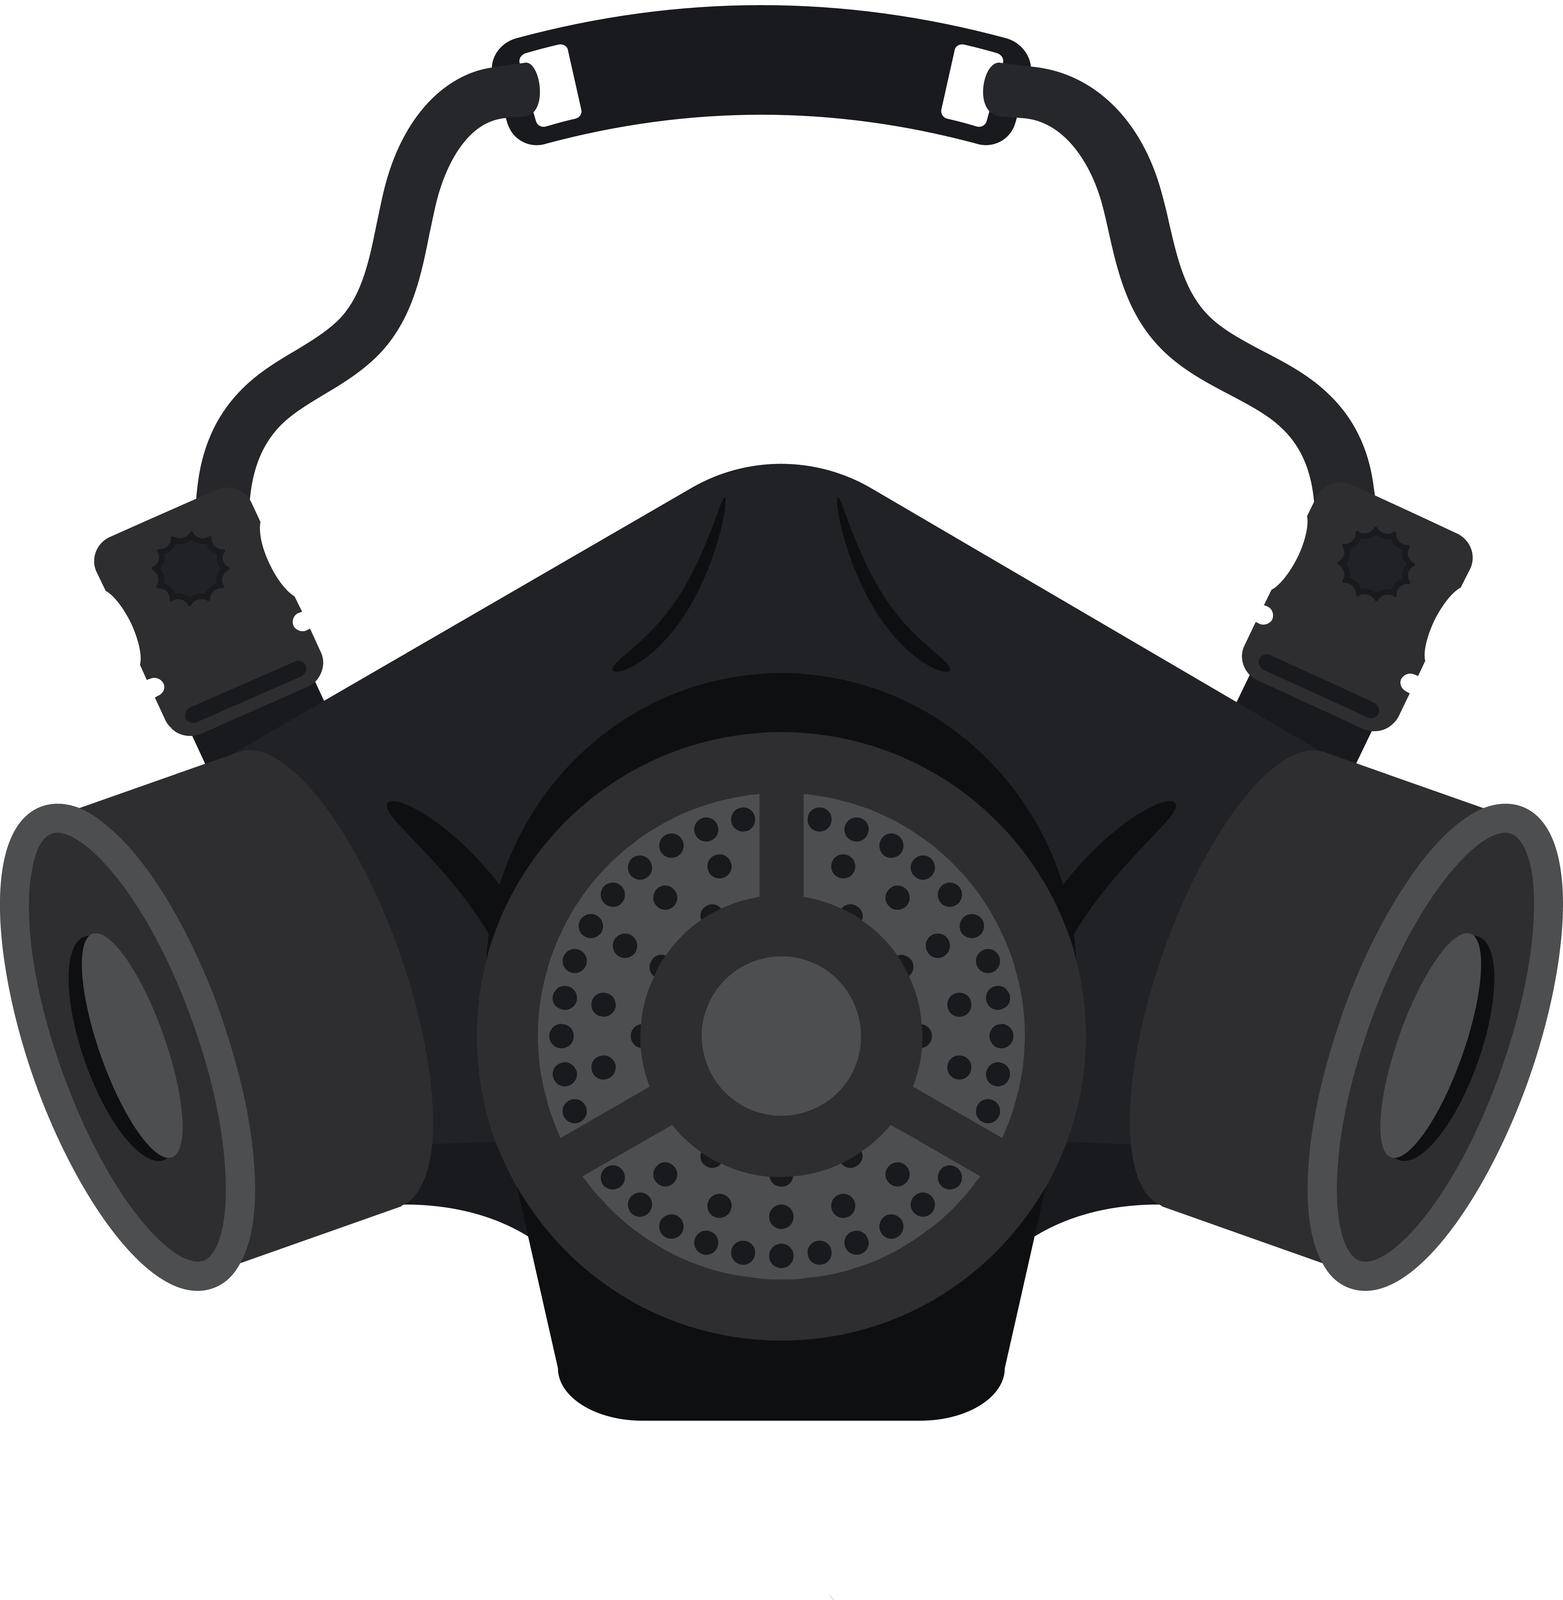 Gas mask. Protection army equipment from toxic and chemical danger for safety. Vector by Javvani